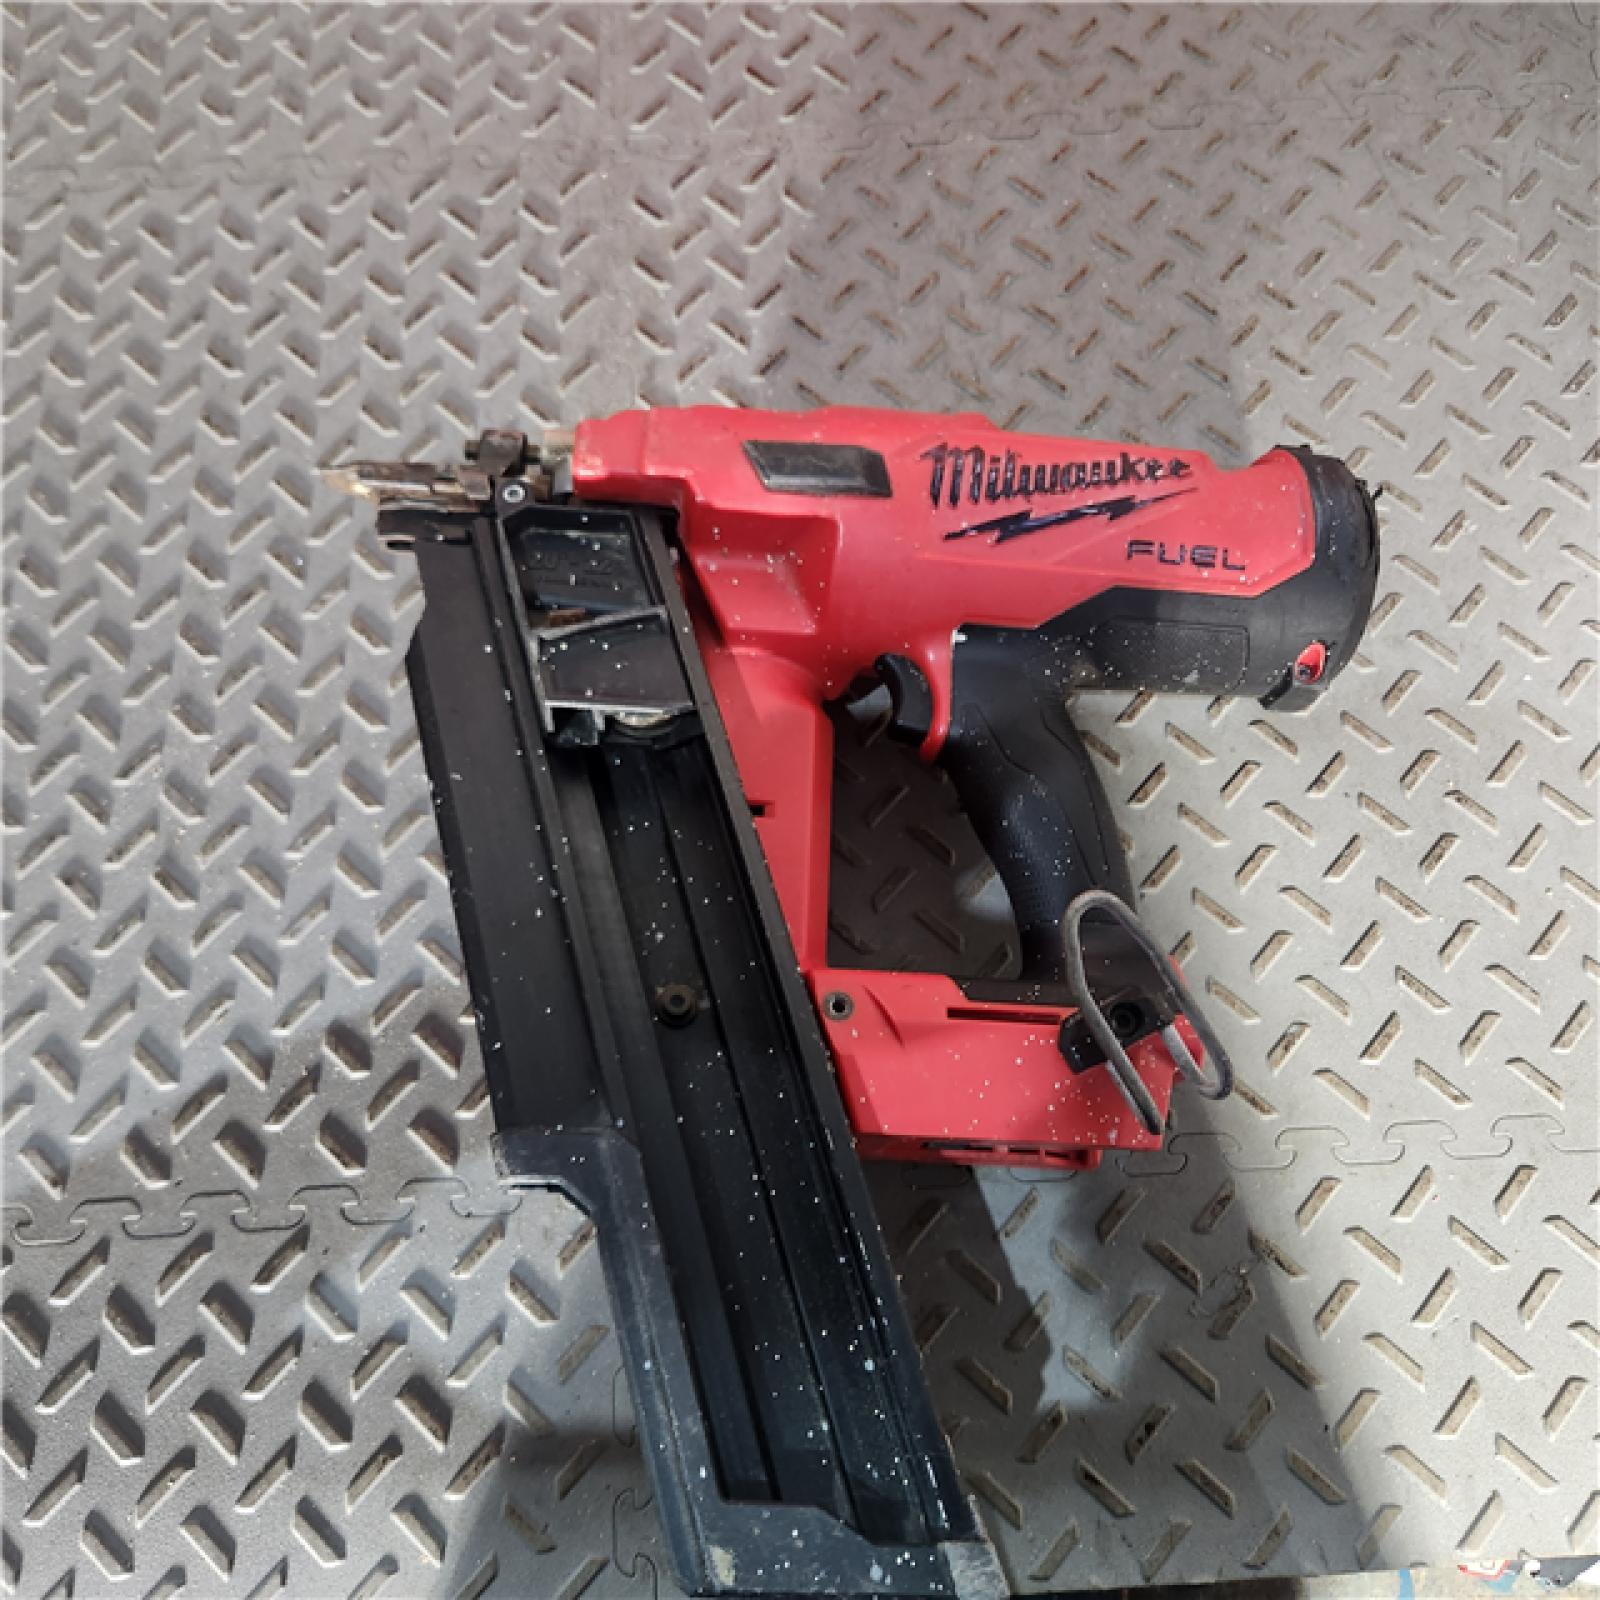 Houston location- AS-IS Milwaukee 2744-20 21-Degree 3-1/2 Plastic Collated M18 FUEL Cordless Framing Nailer (Tool Only)